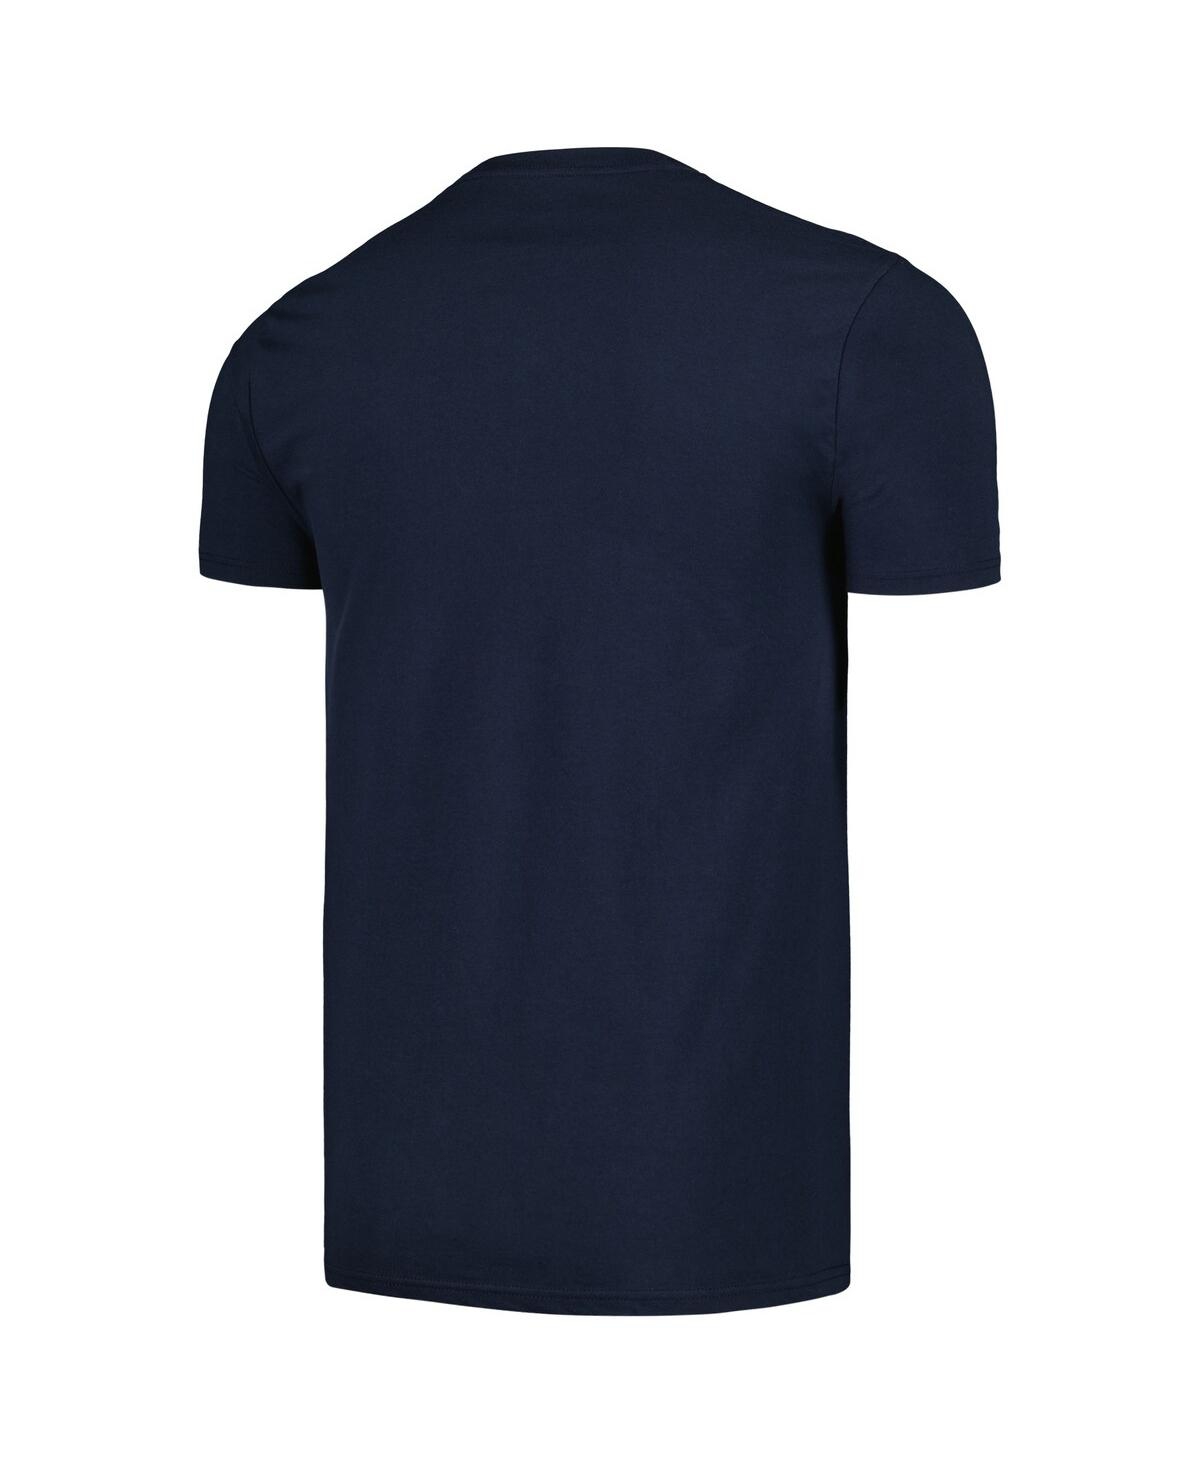 Shop American Classics Men's Navy Saved By The Bell Faded Squiggles T-shirt